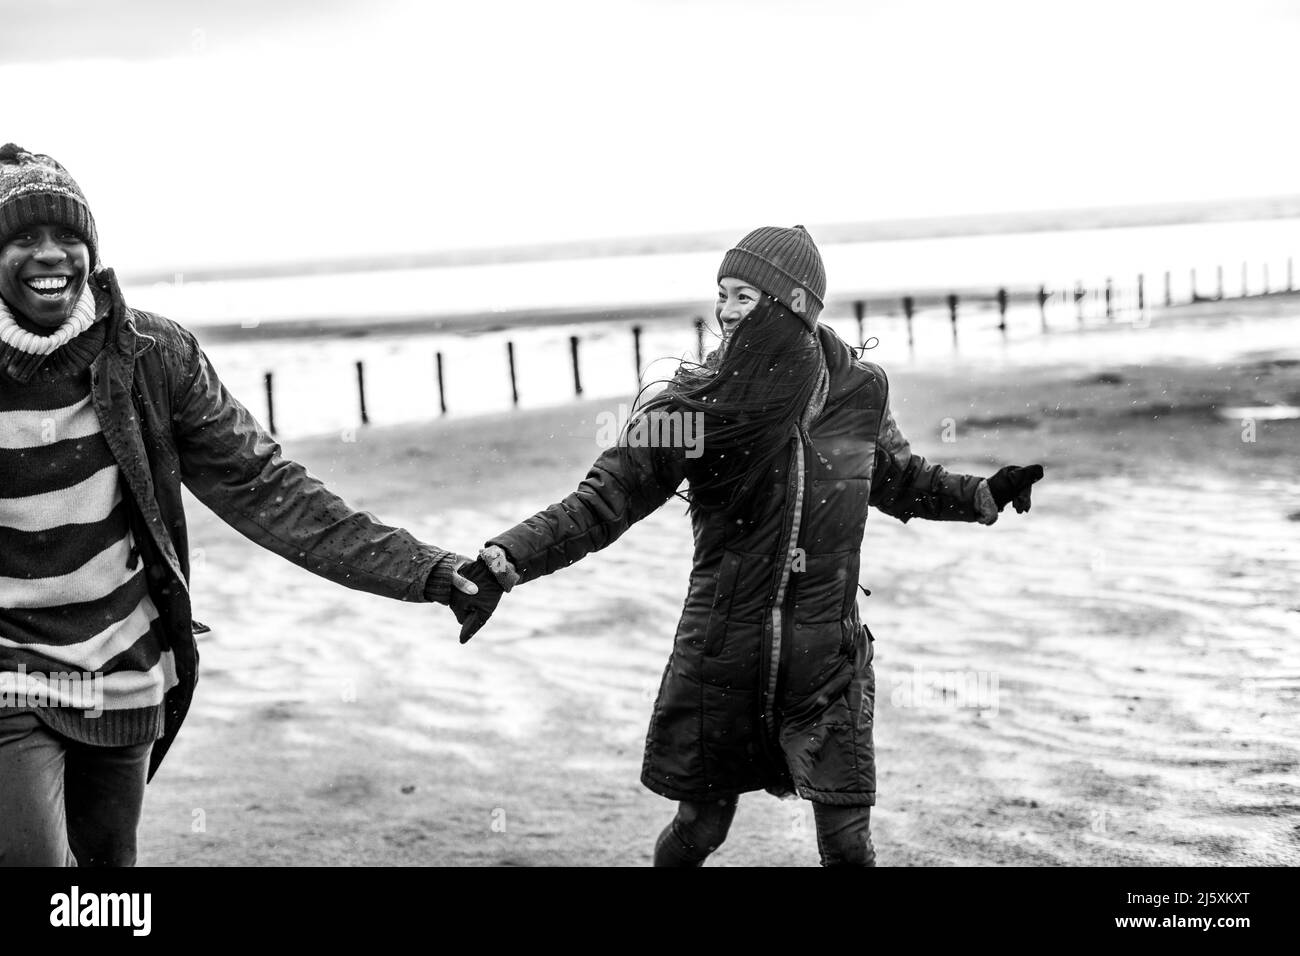 Playful couple in warm clothing holding hands on winter beach Stock Photo